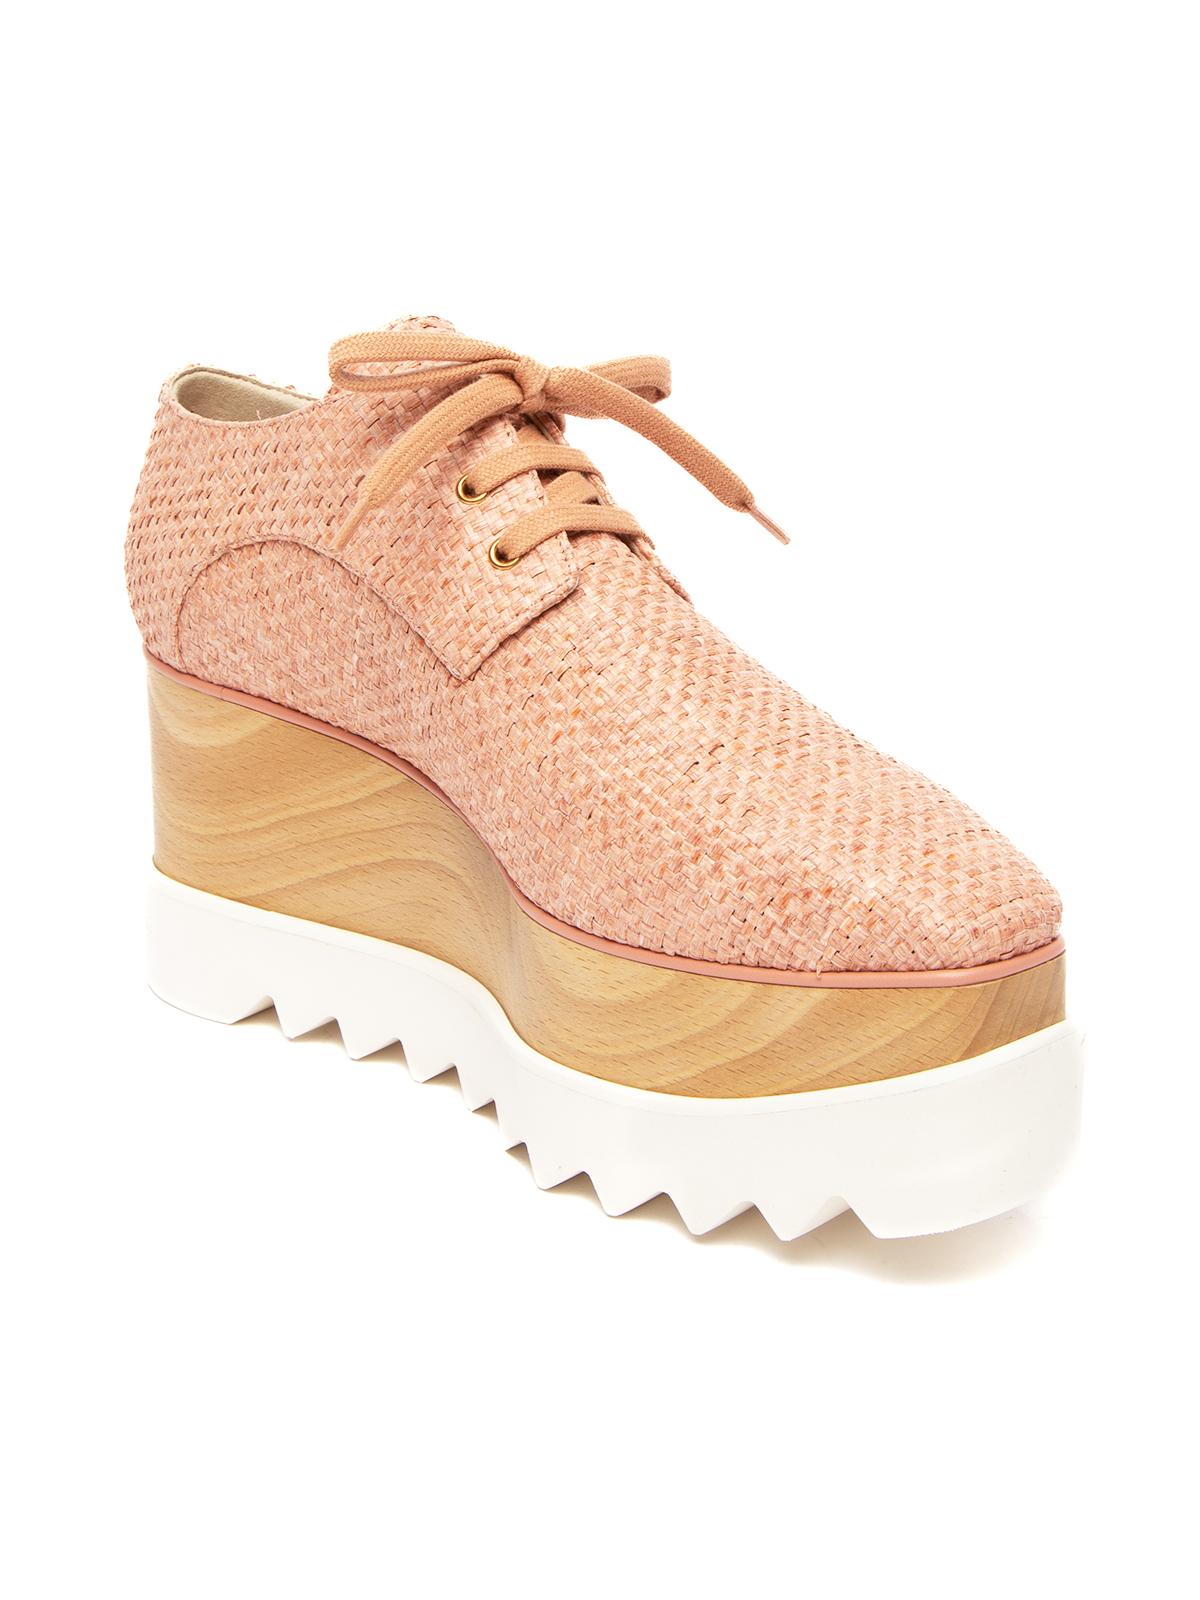 CONDITION is Never worn, with tag. No wear to sneakers is evident on this brand new Stella Mccartney designer resale item. Damaged box. Details Elyse Rafia Pink Wicker Platform Rectangle toe Lace up fastening Made in Italy Composition